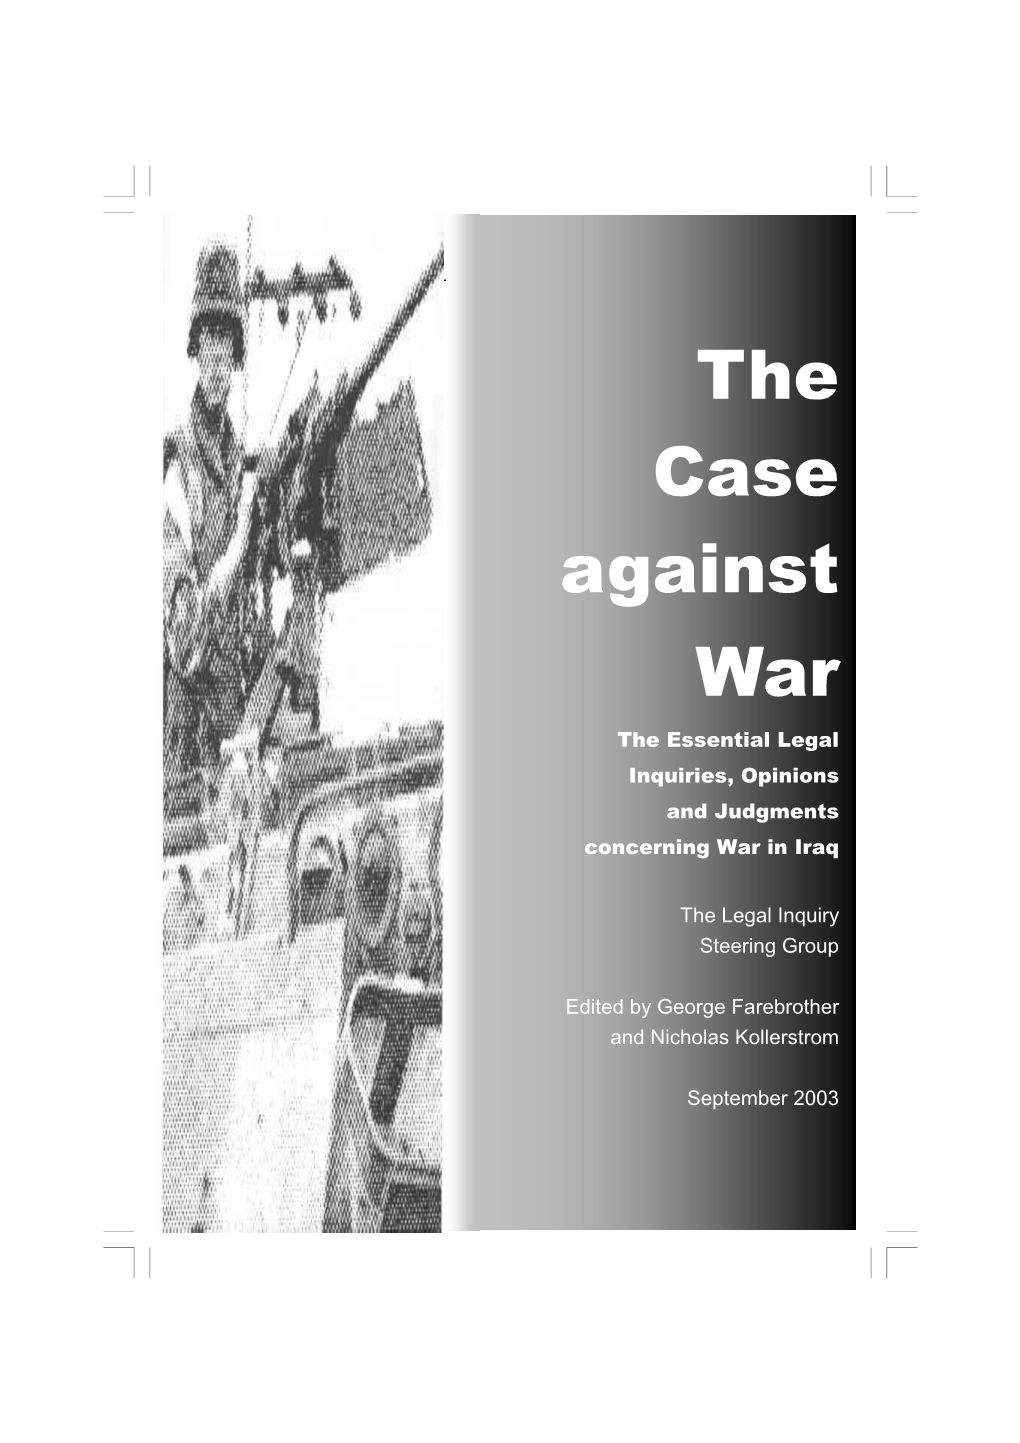 The Case Against War the Essential Legal Inquiries, Opinions and Judgments Concerning War in Iraq